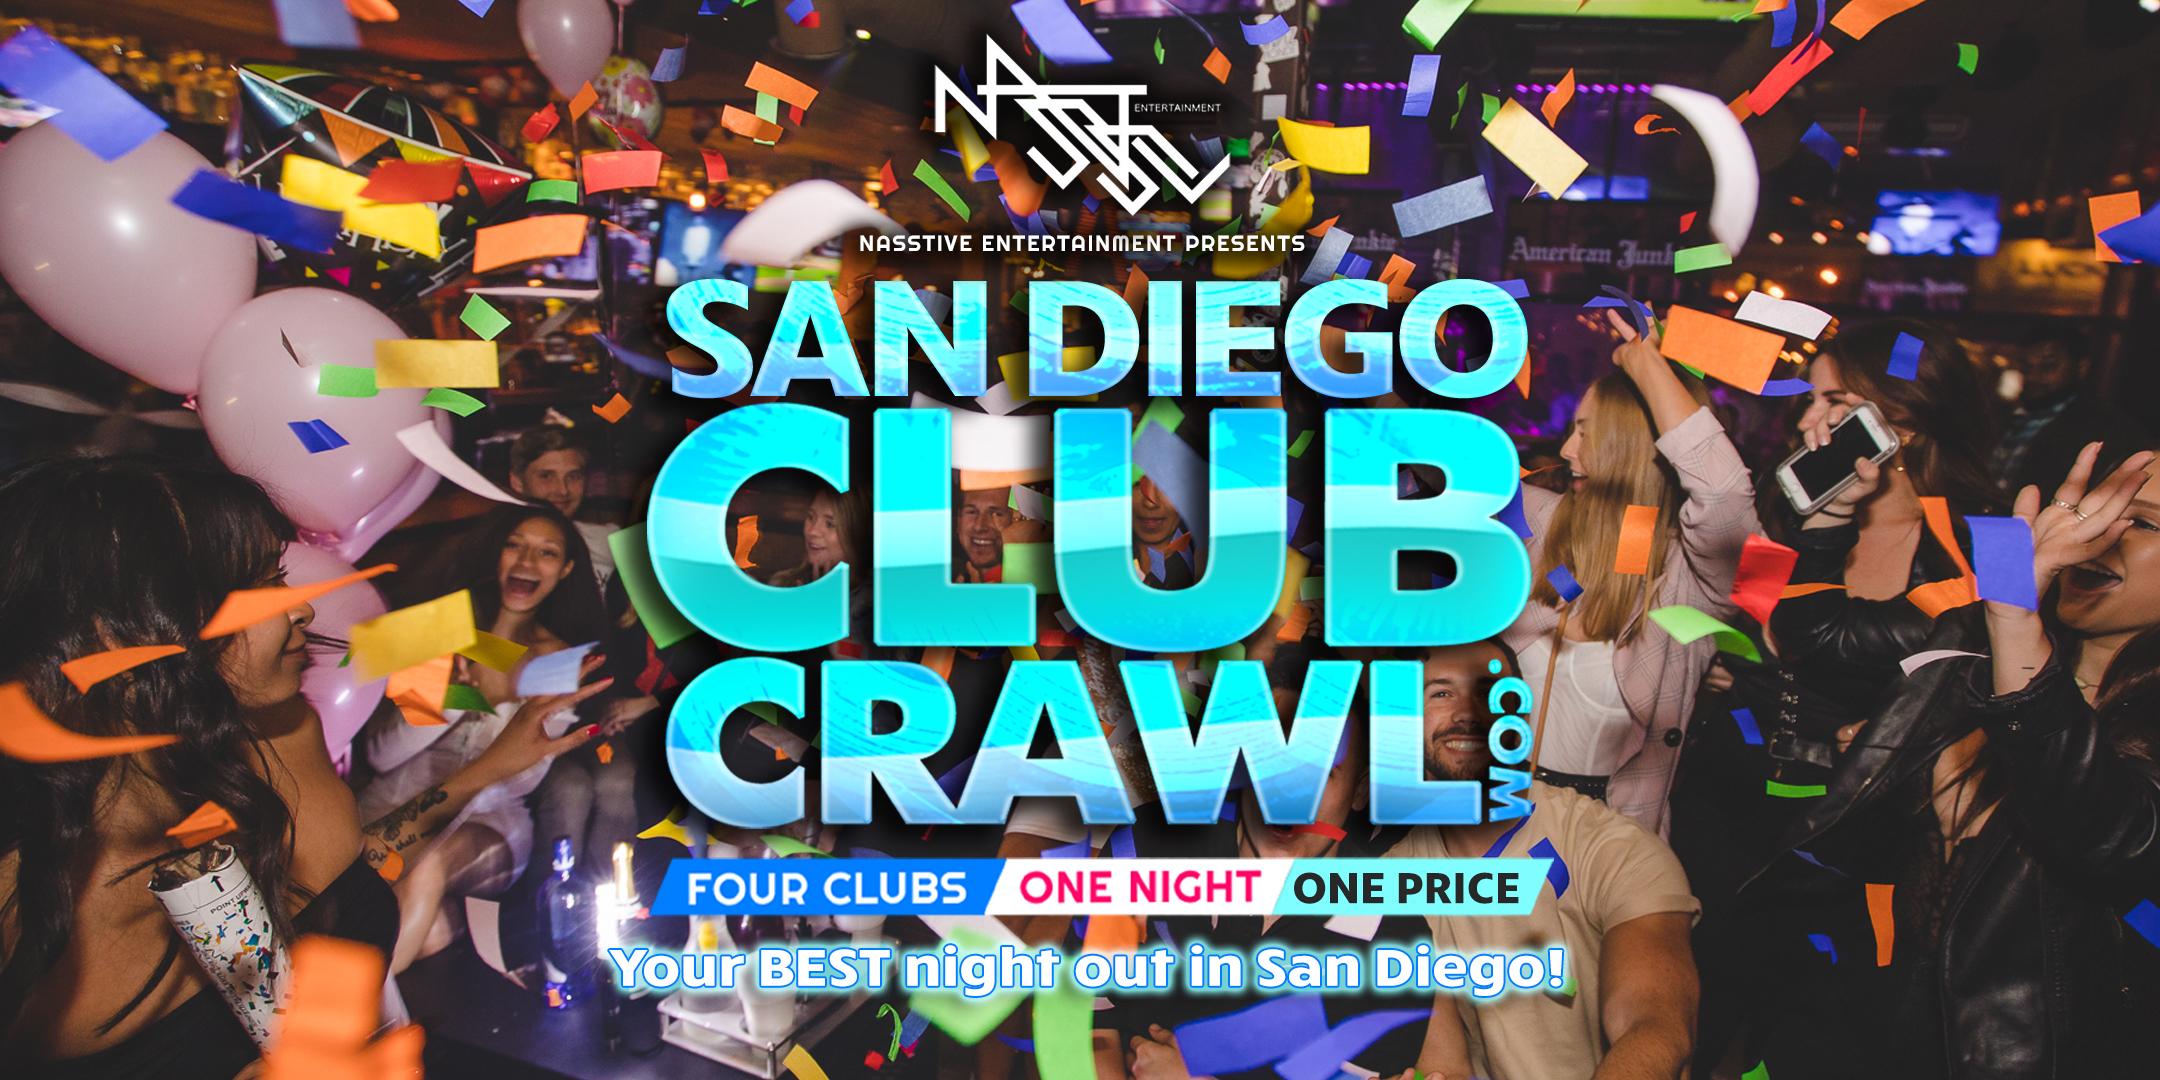 San Diego Club Crawl - Guided party tour to 4 SD nightclubs and bars 